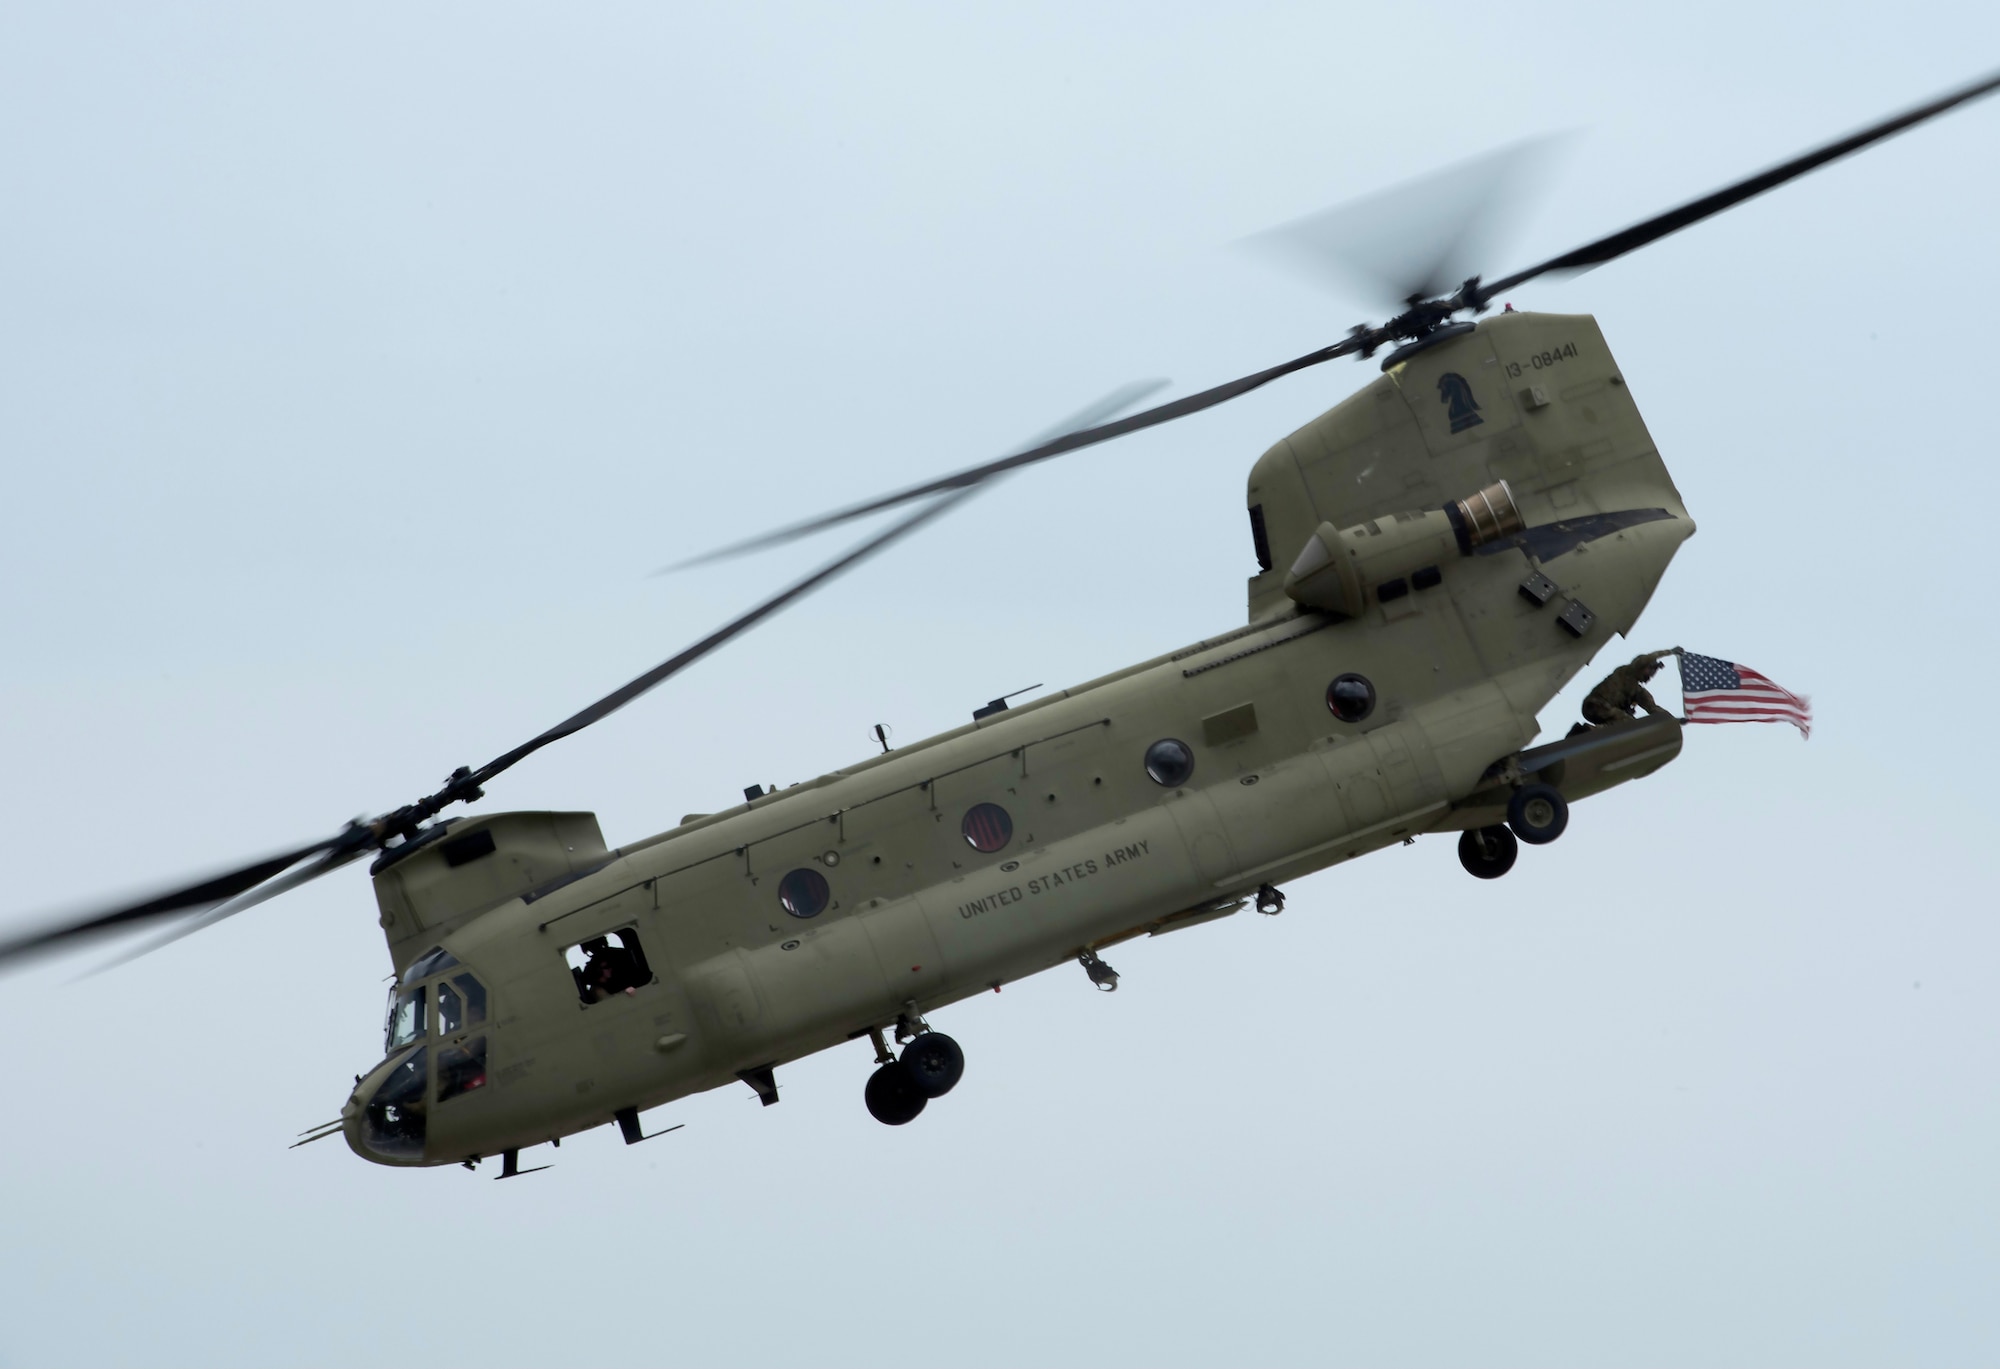 A U.S. Army Chinook helicopter flies over Bowman Field during an aerial demonstration for the Thunder Over Louisville air show in Louisville, Ky., April 17, 2021. This year's event featured aircraft from multiple military and civilian agencies. (U.S. Air National Guard photo by Staff Sgt. Clayton Wear)